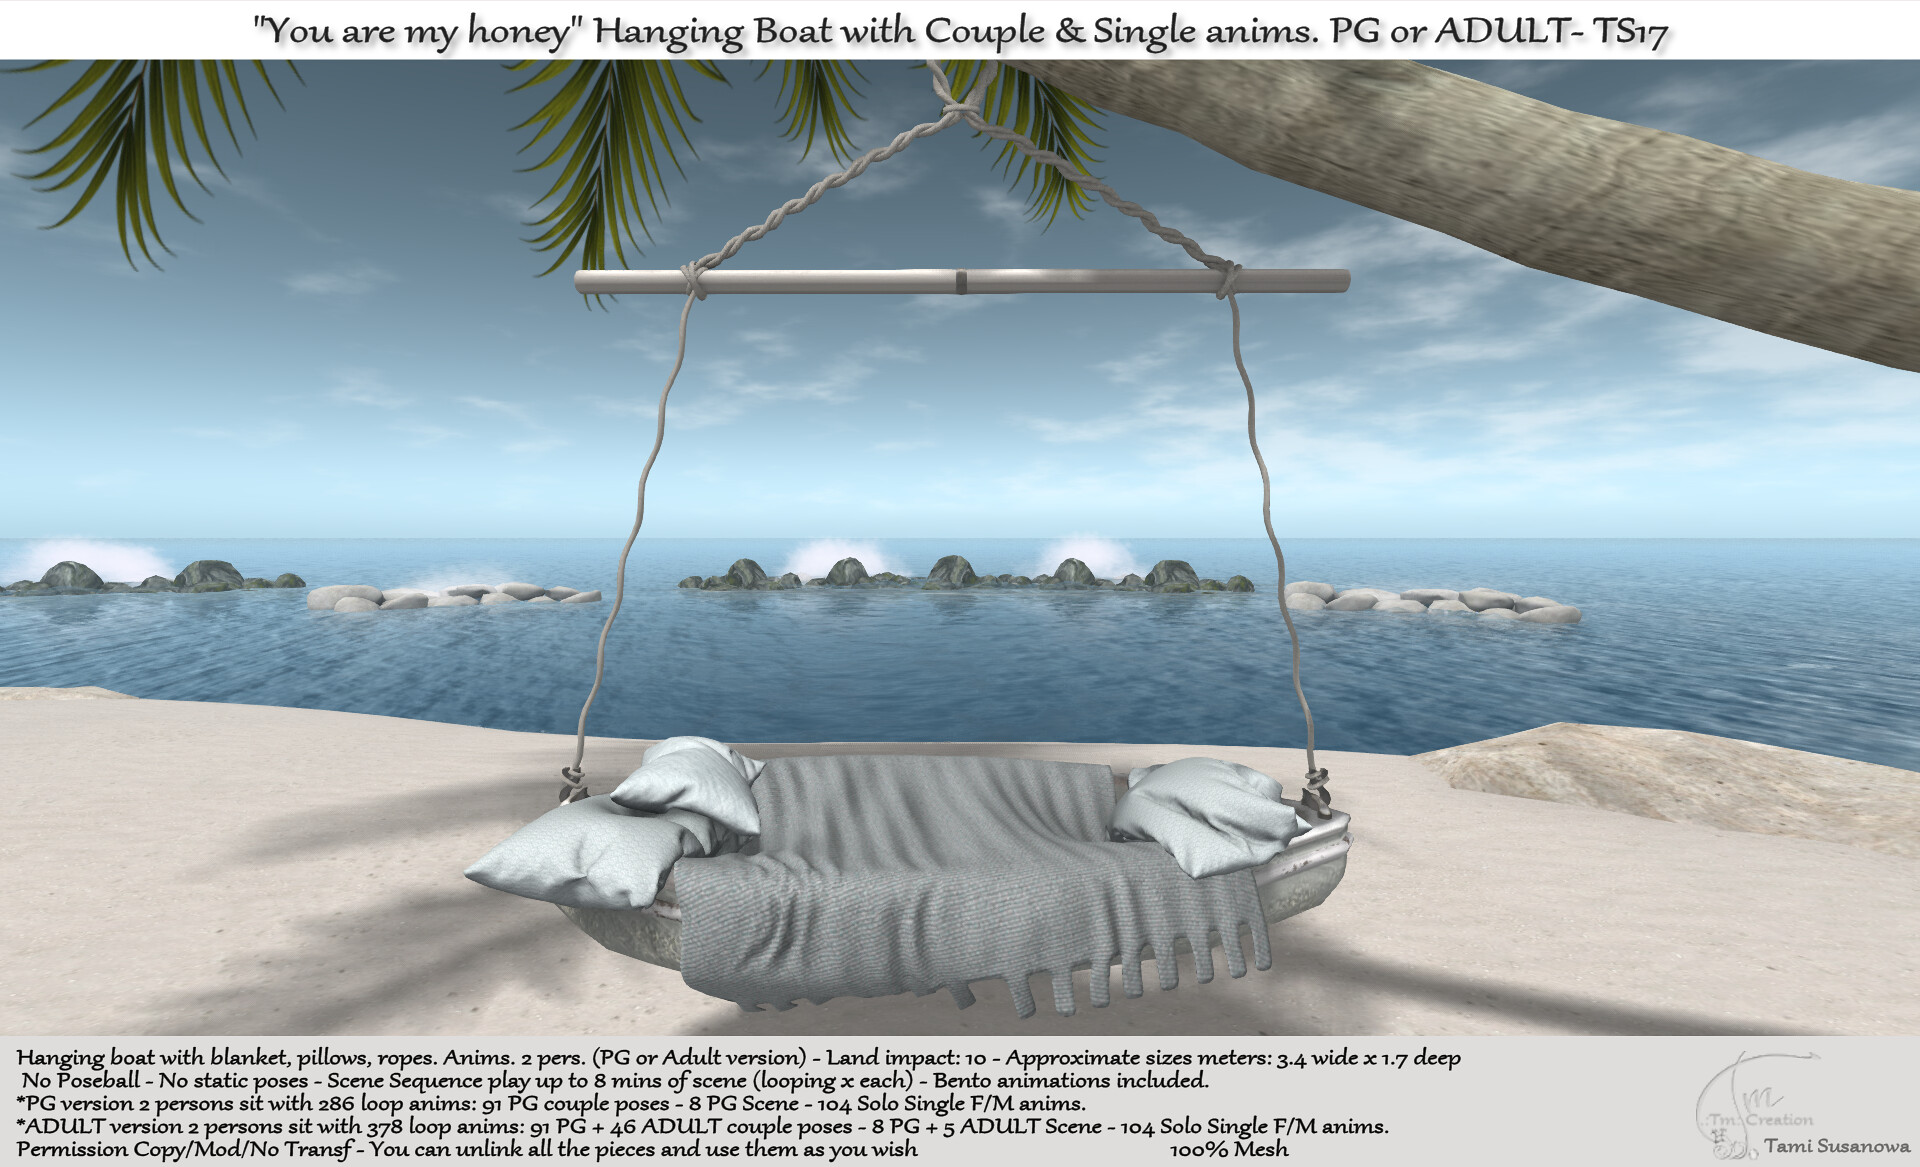 Tm Creation – “You are my honey” Hanging Boat